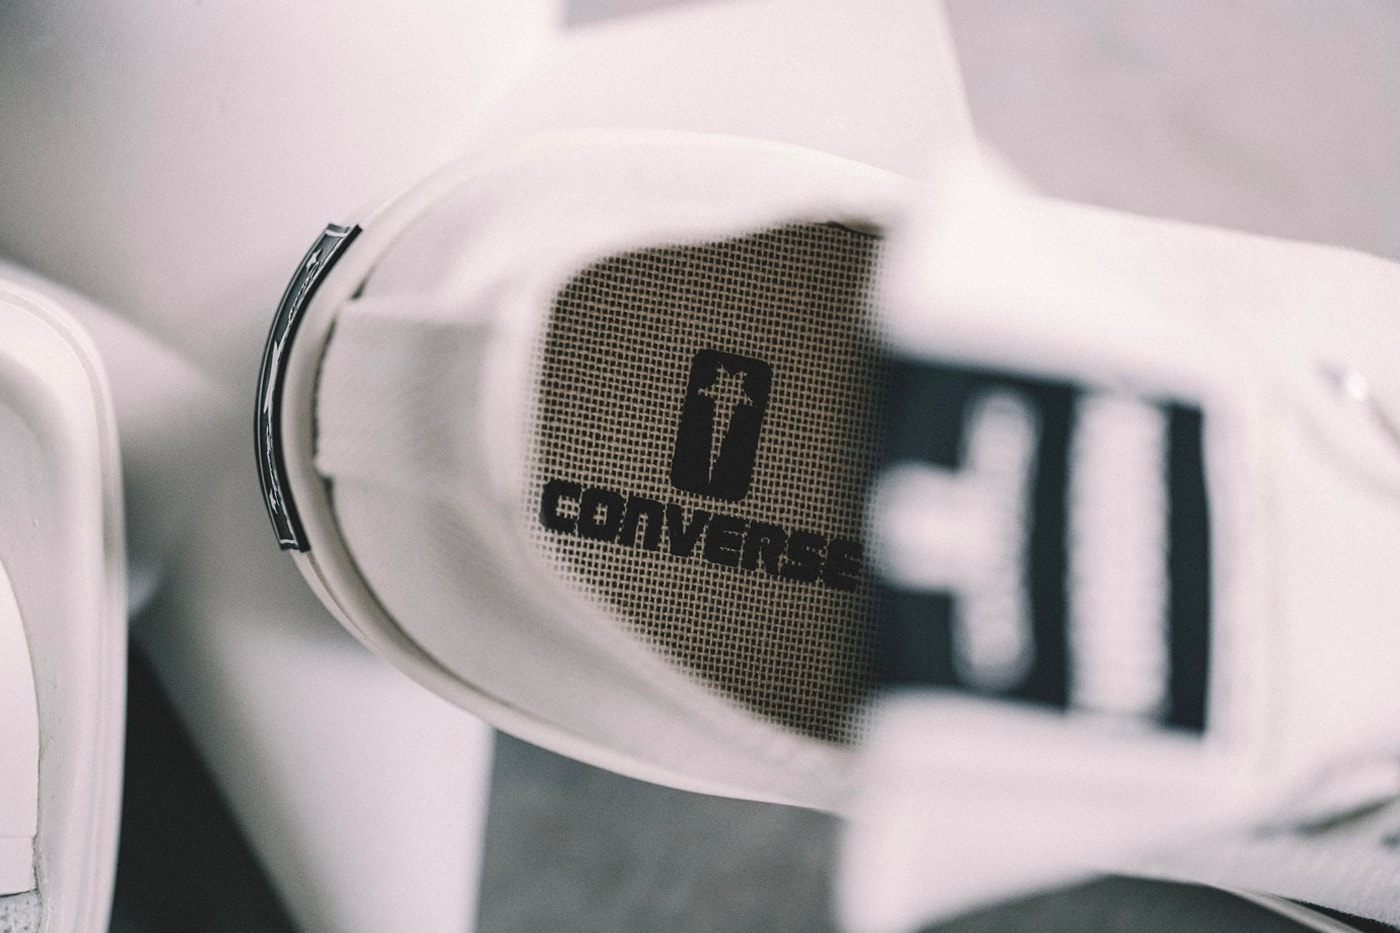 Converse Rick Owens DRKSHDW TurboDrk Chuck 70 Ox Low Closer Look Release Info White Date Buy Price